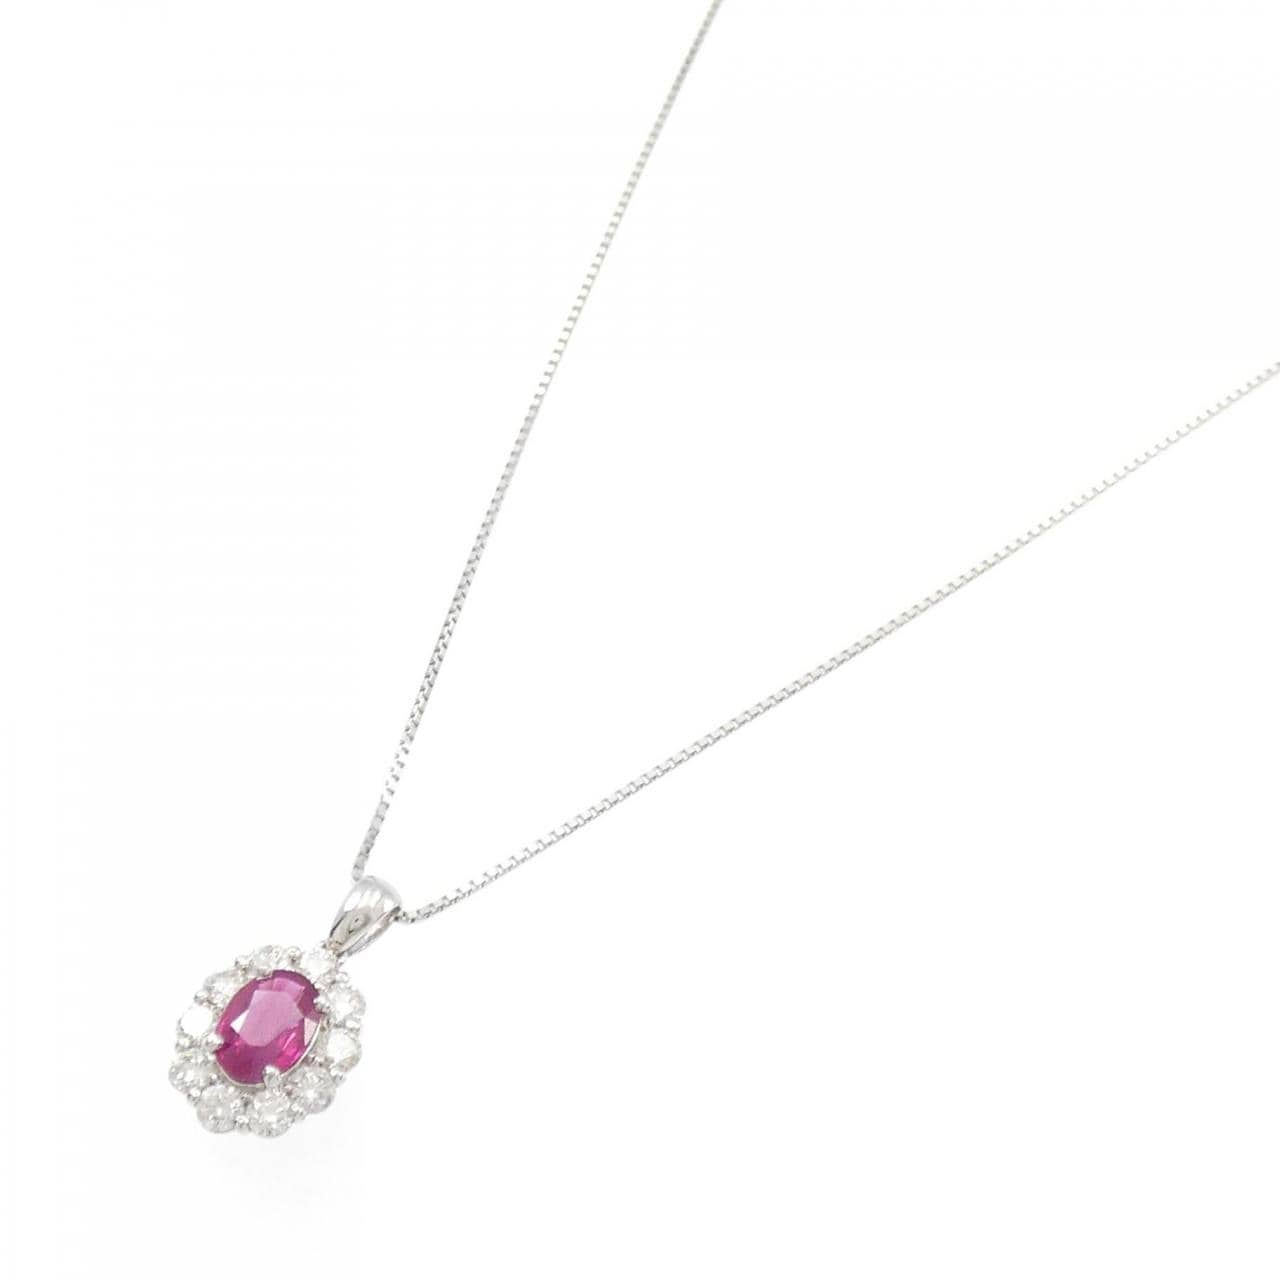 [Remake] PT Ruby Necklace 0.90CT Made in Burma